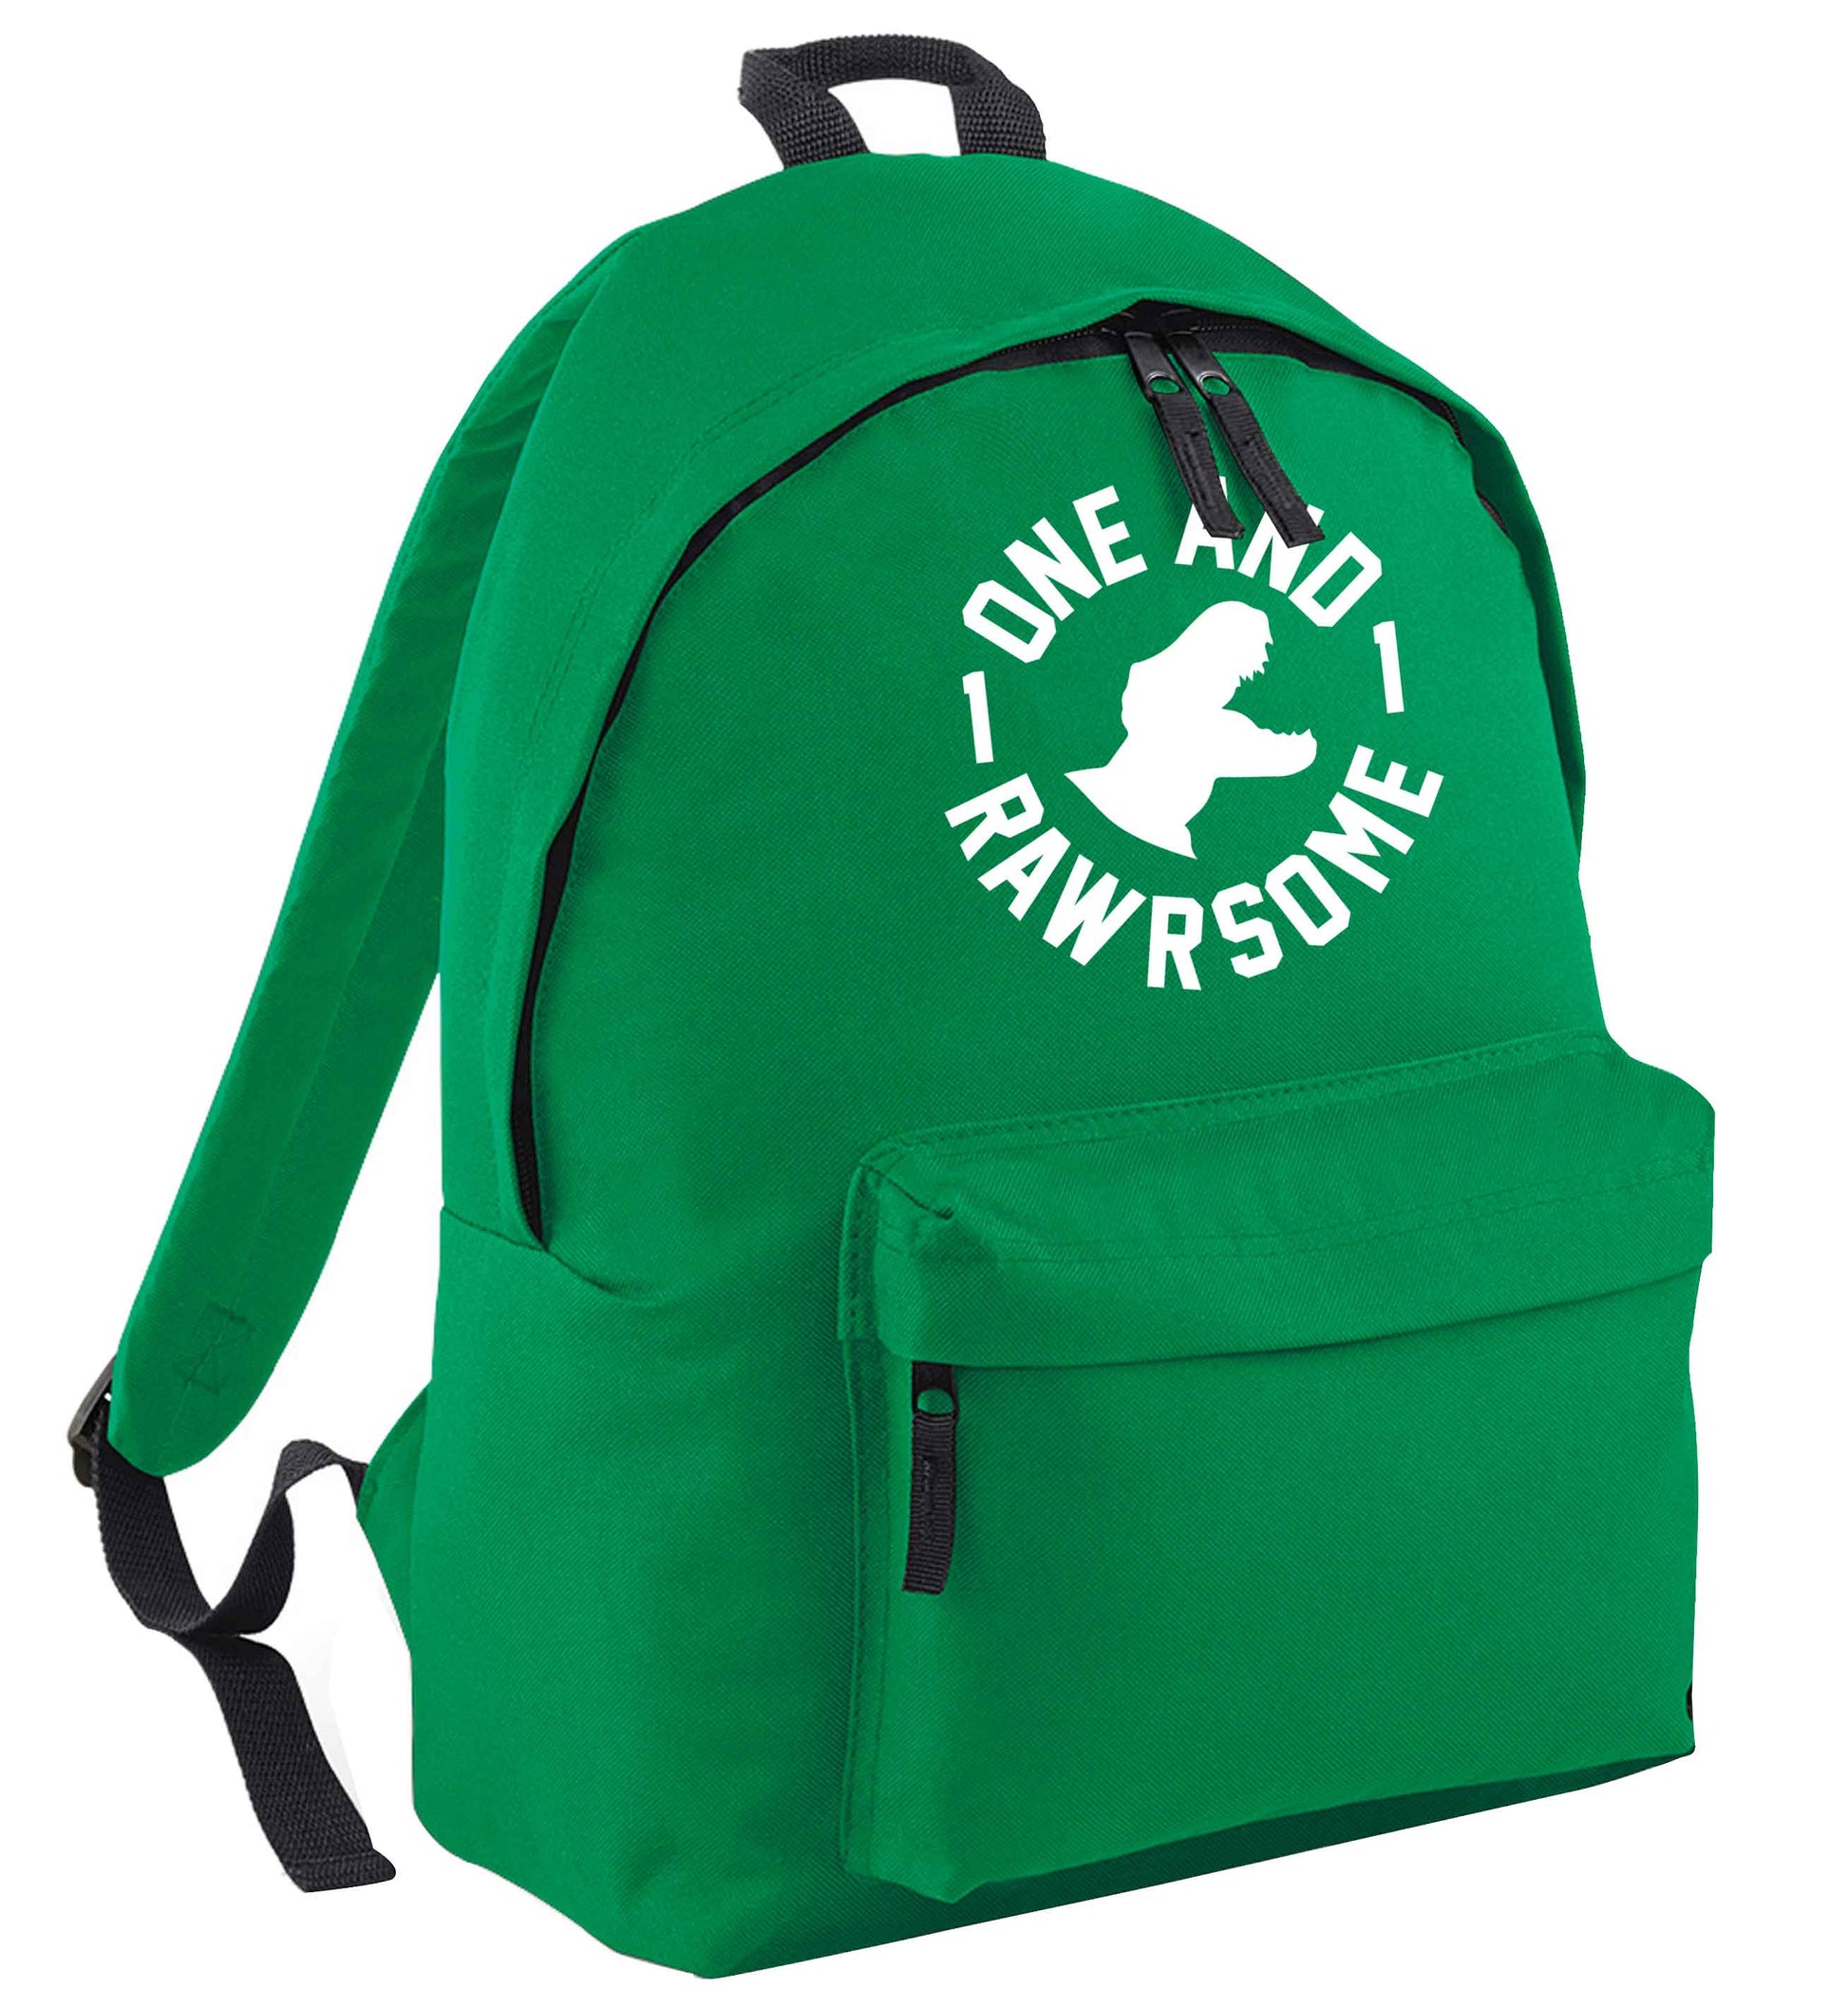 One and Rawrsome green adults backpack